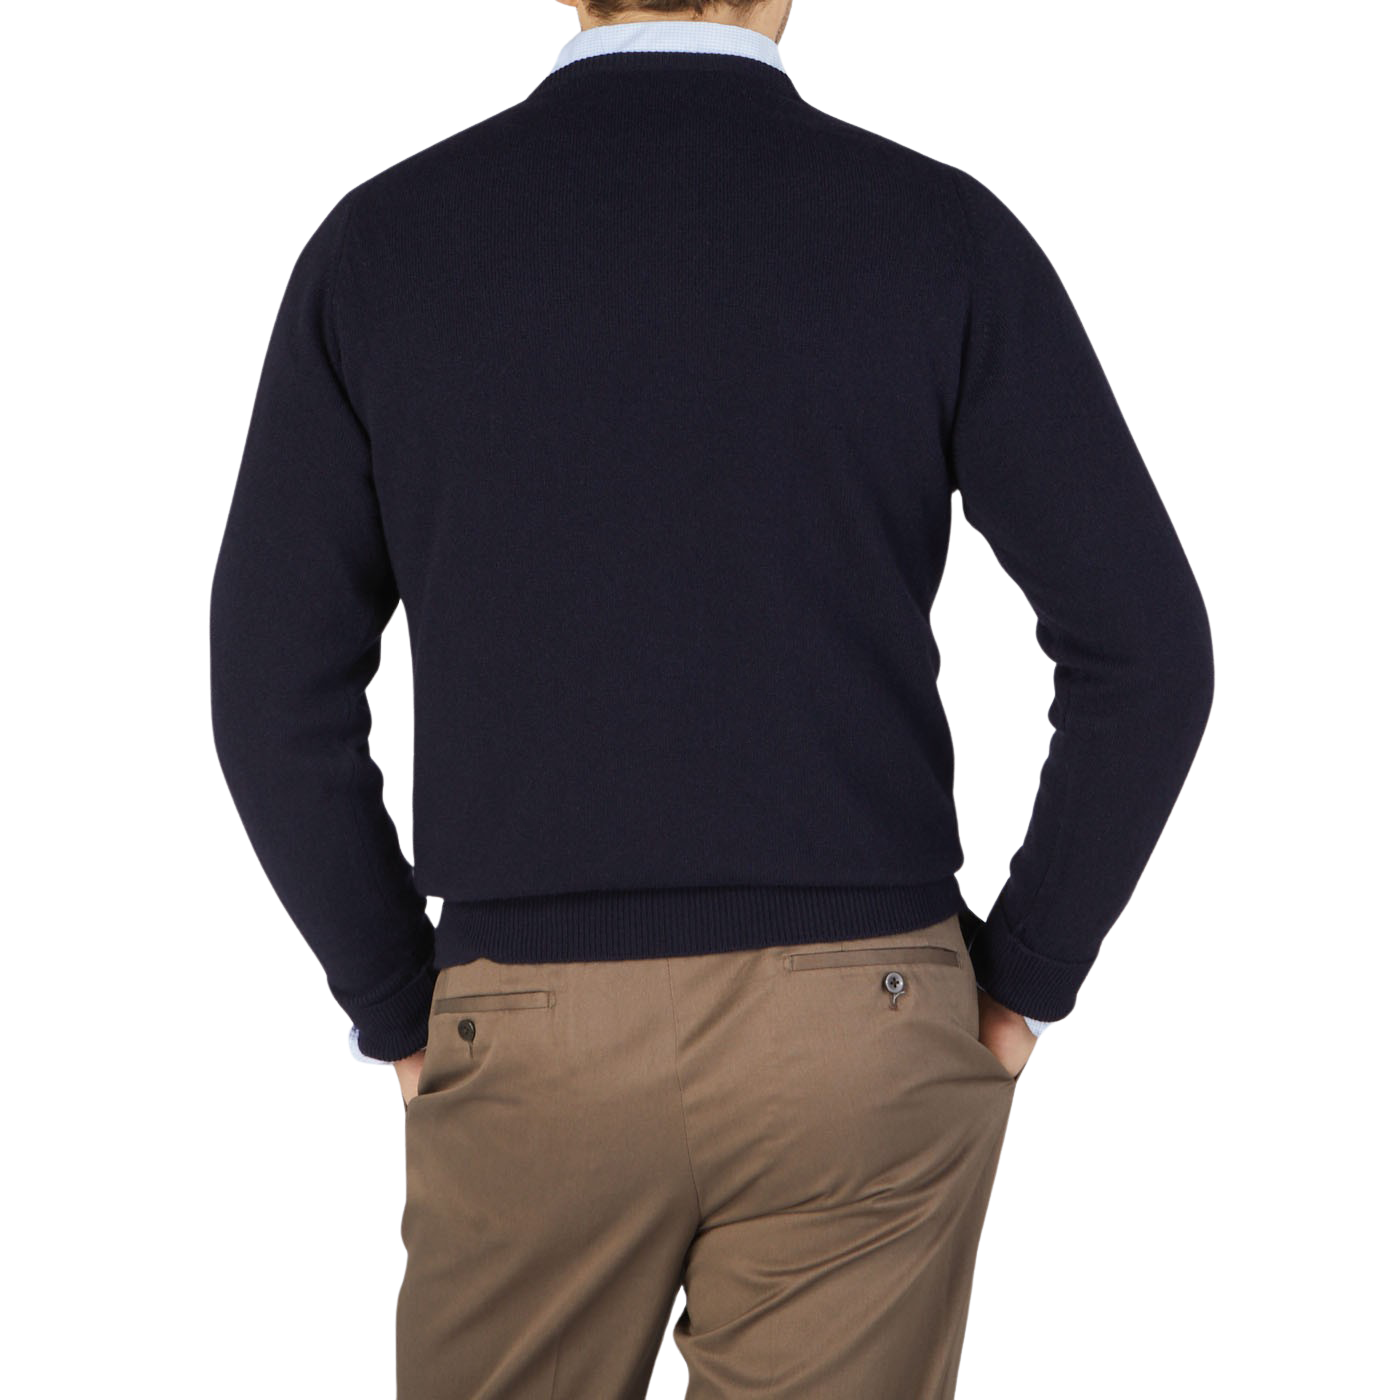 The back view of a man wearing a William Lockie Navy Crew Neck Cashmere Sweater and tan pants.